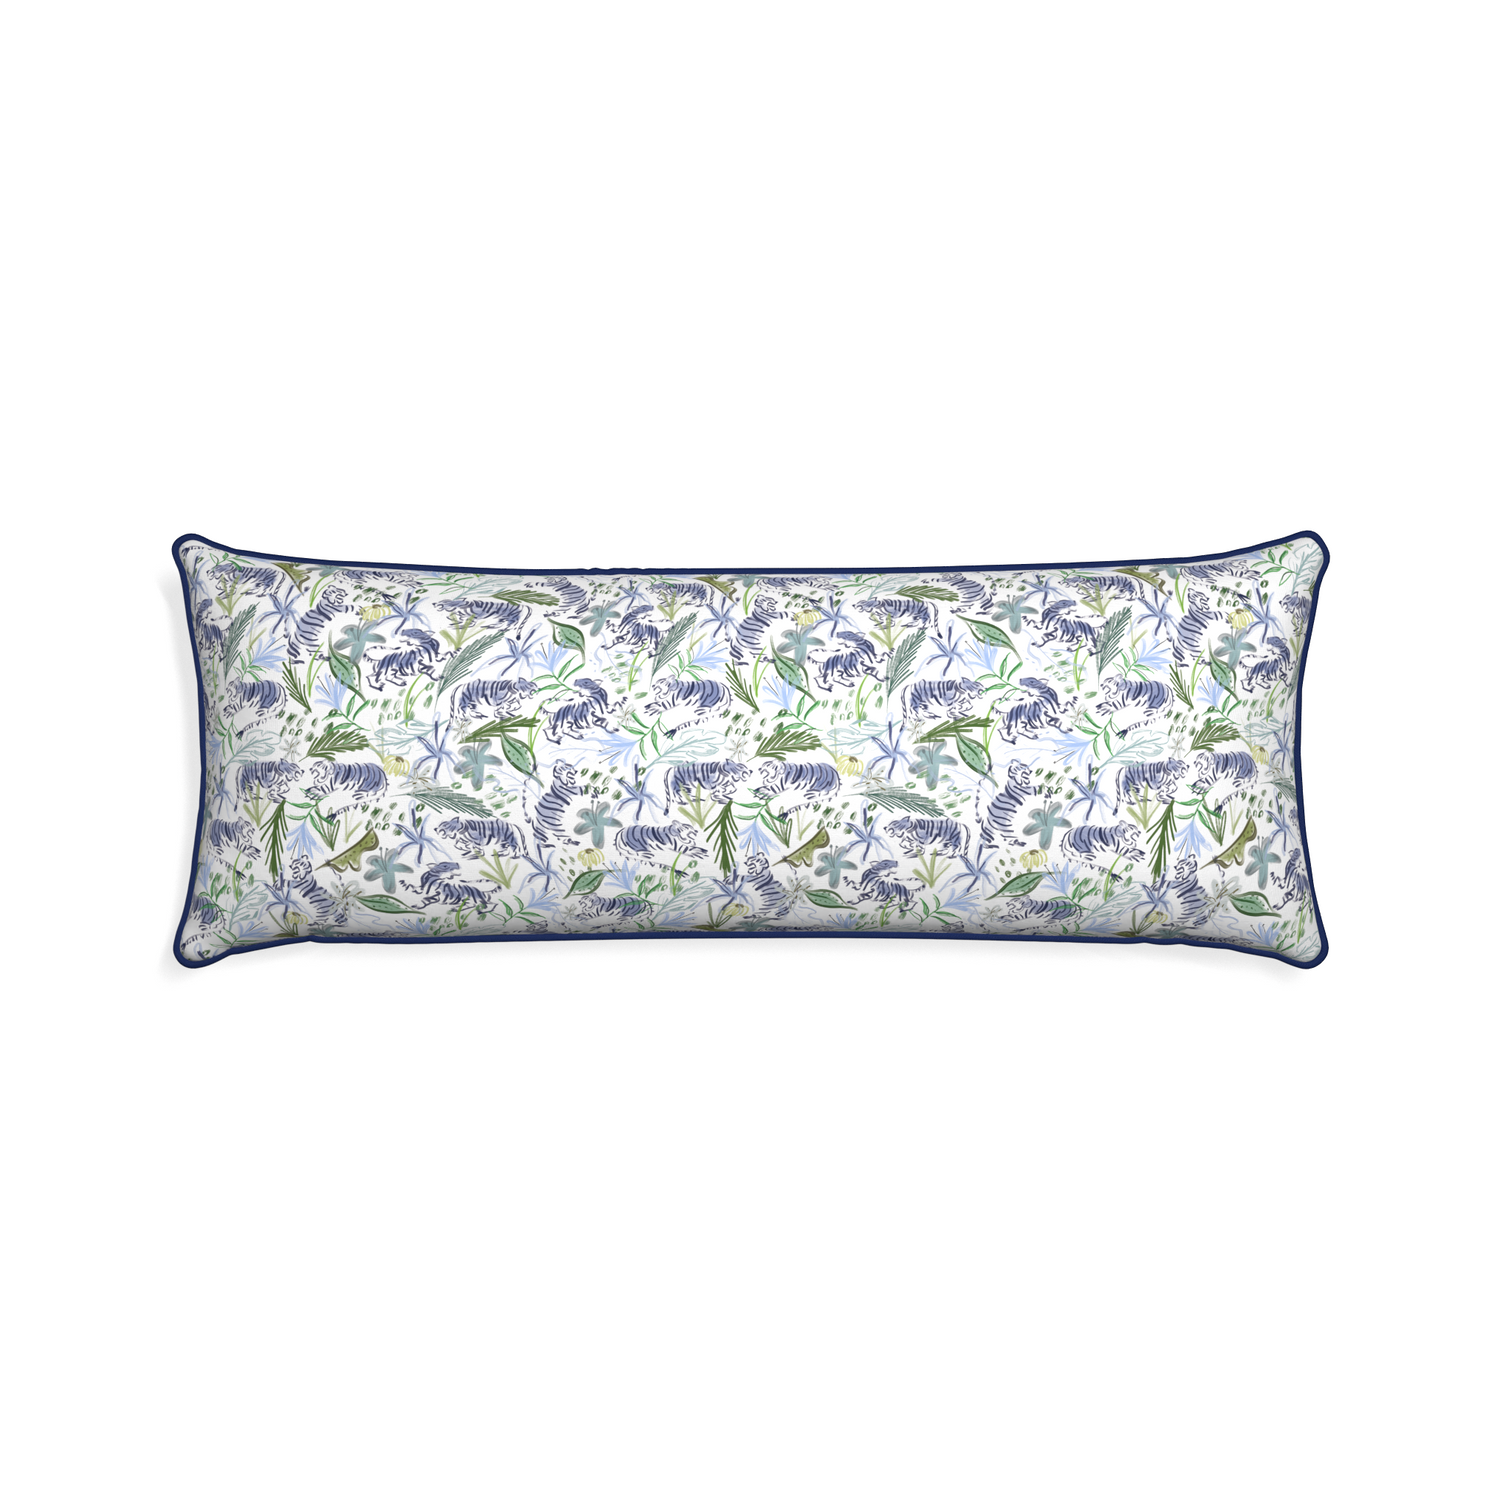 Xl-lumbar frida green custom green tigerpillow with midnight piping on white background